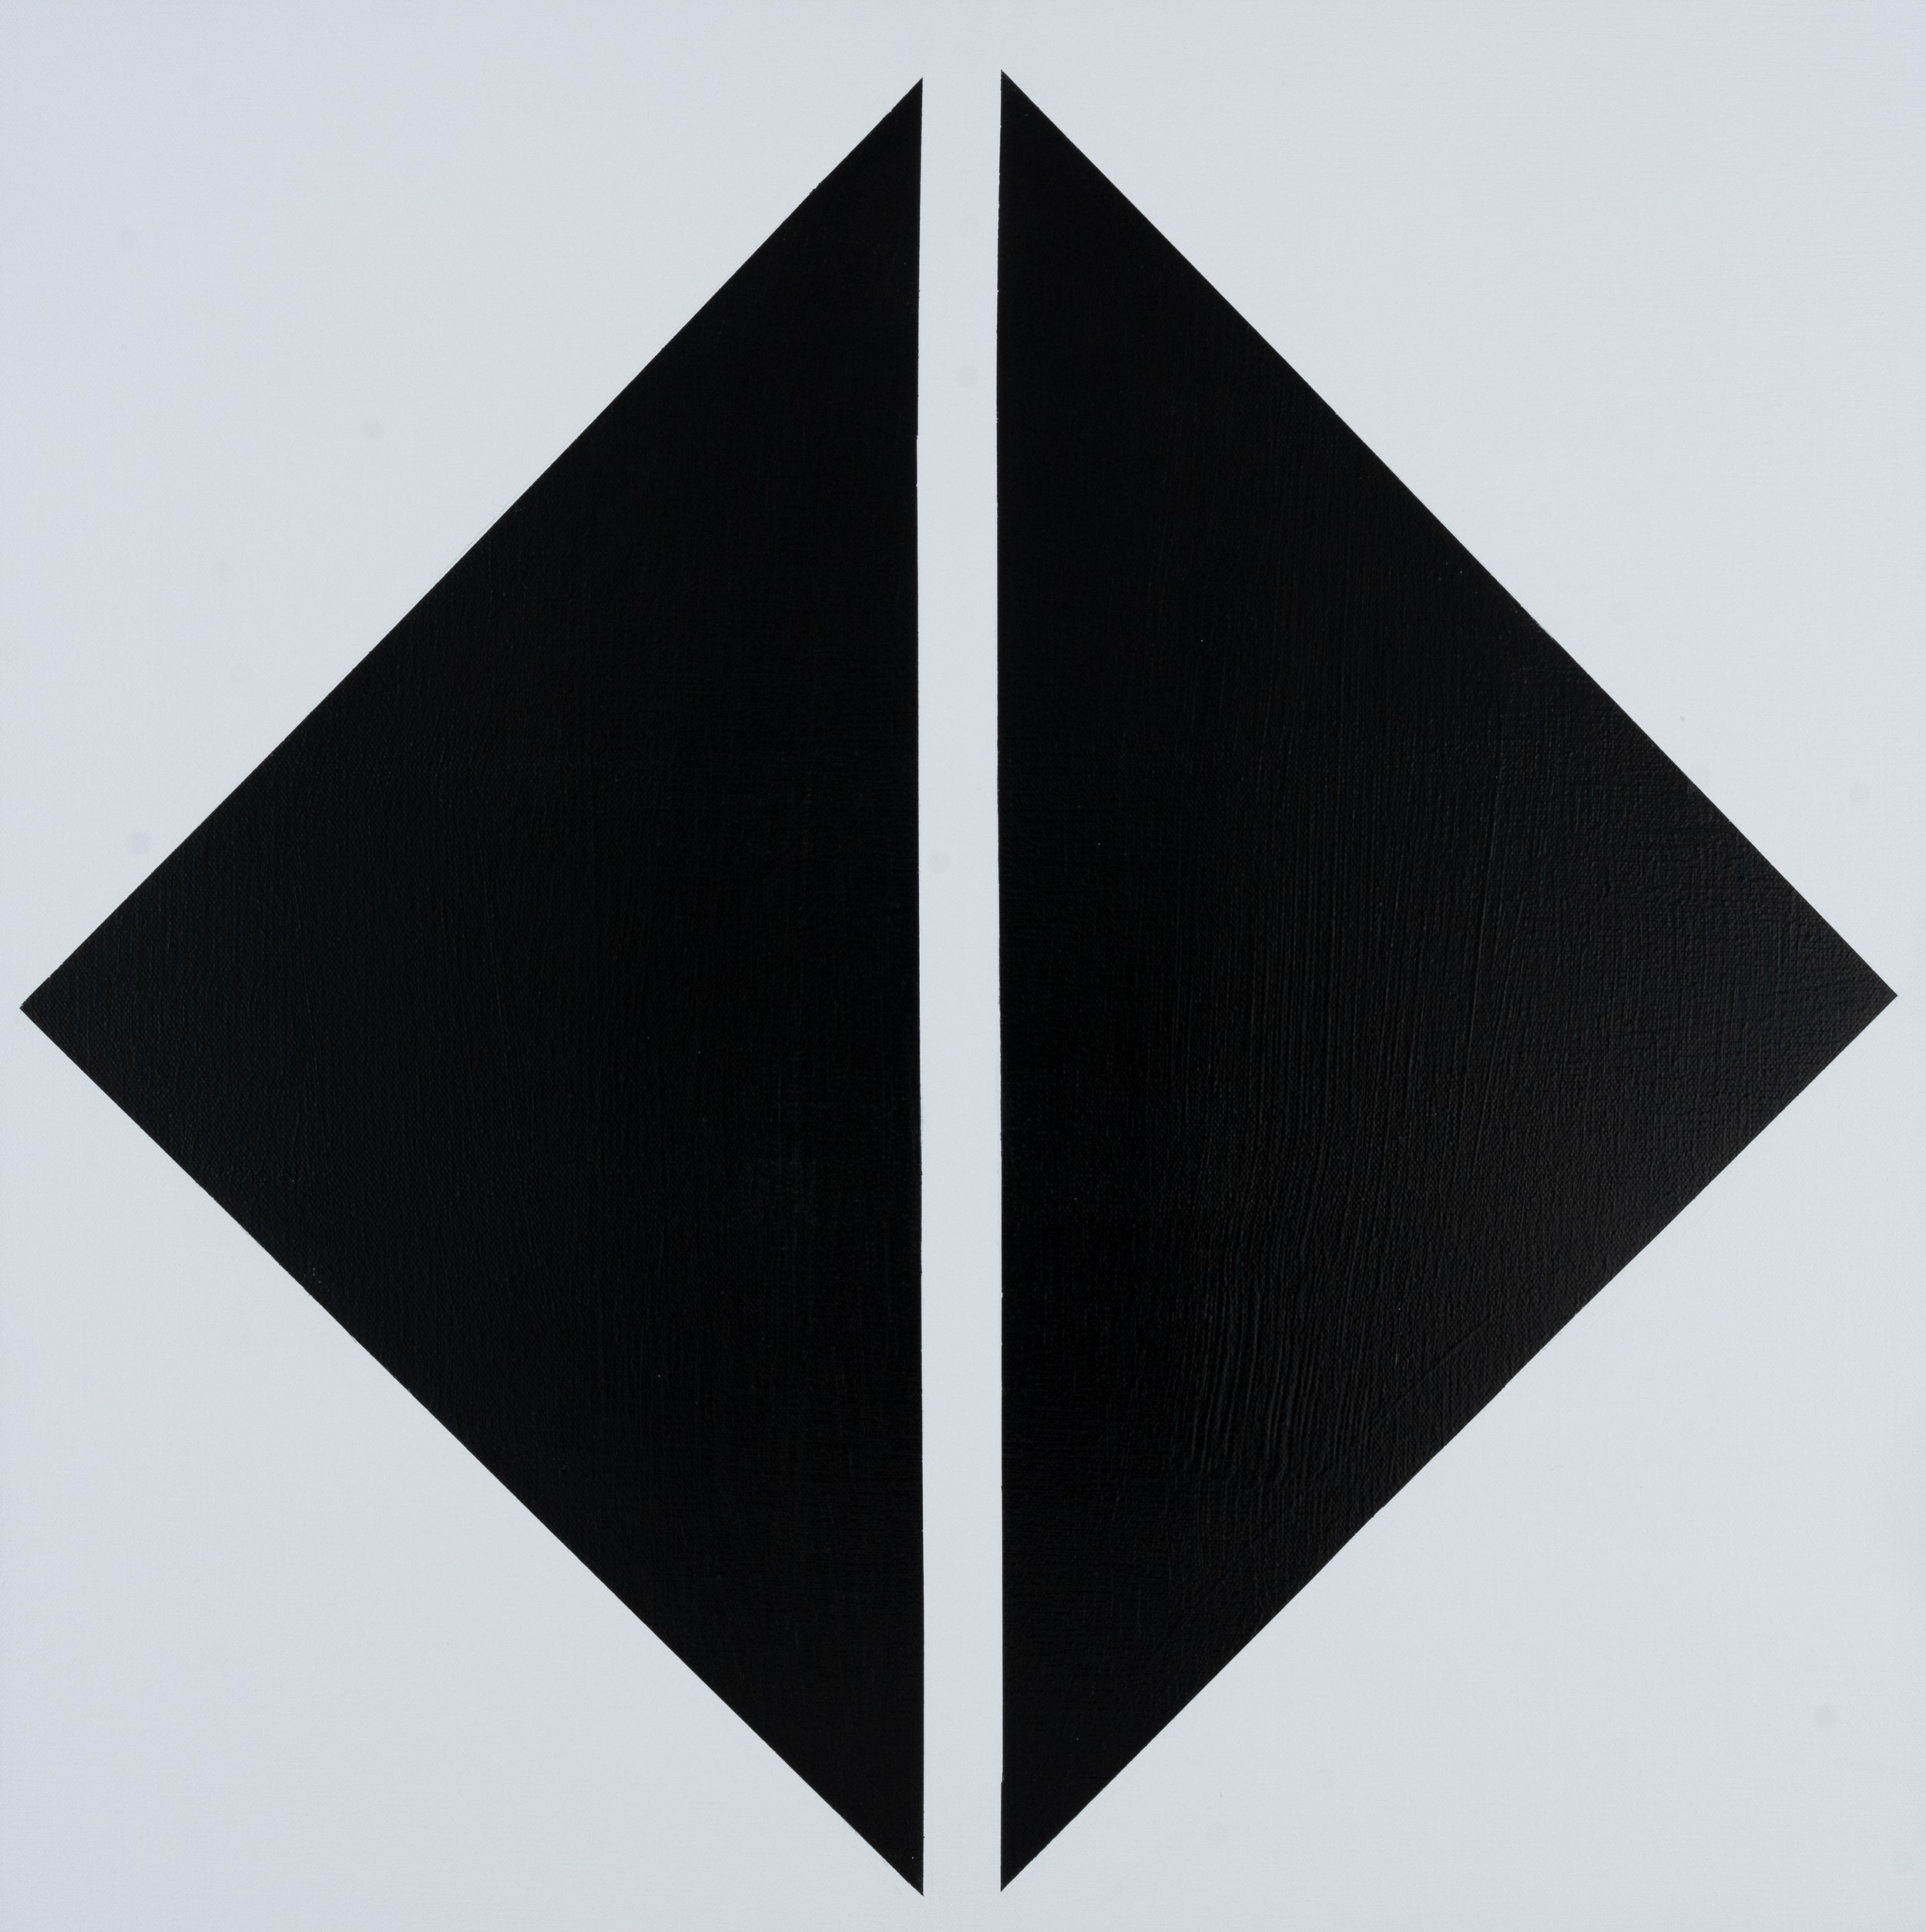 Black and White Divided Square I, 2022, acrylic on canvas, 24x24 inches